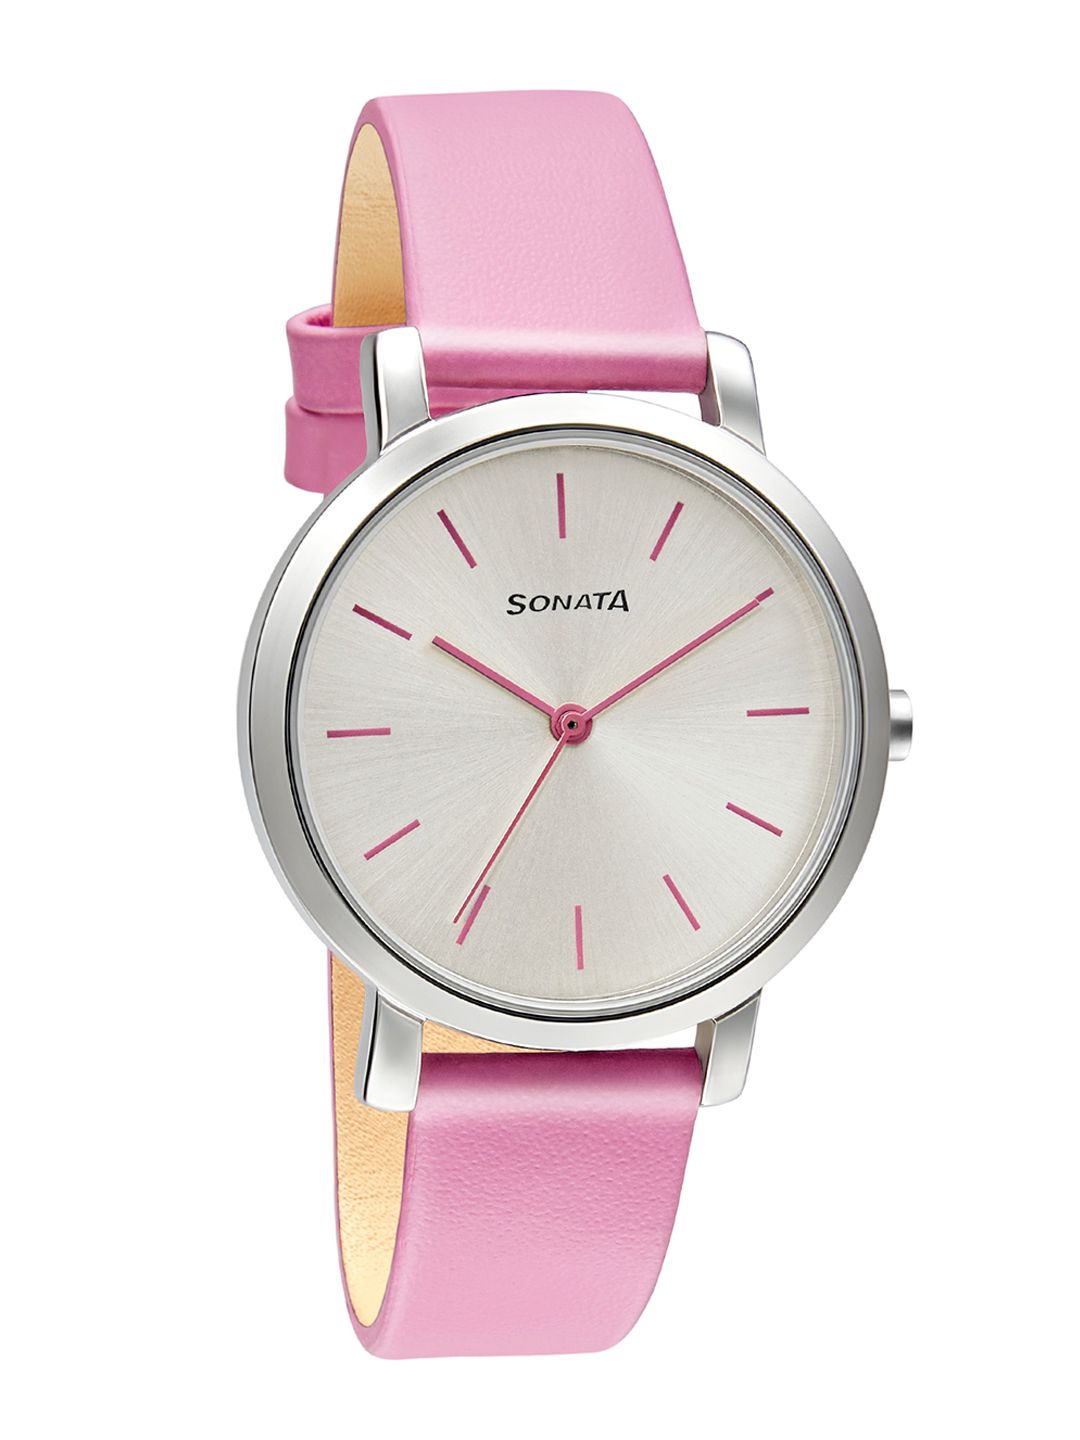 Sonata Women White Brass Dial & Pink Leather Straps Analogue Watch 8164SL08 Price in India